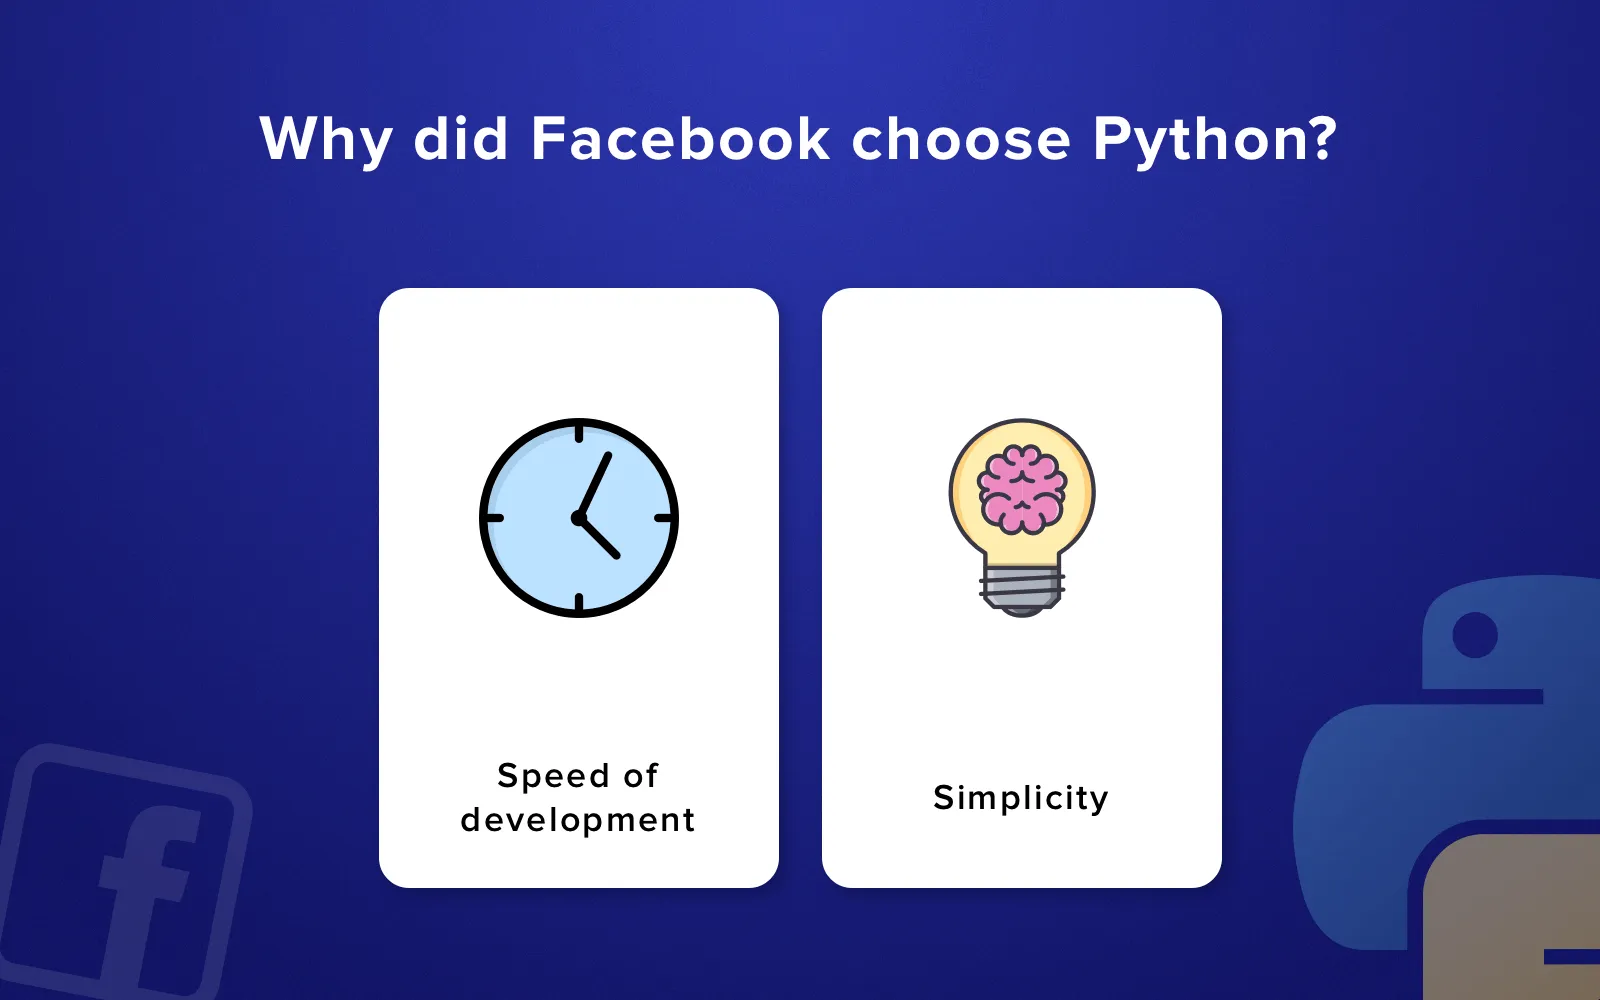 Advantages of Python: Why did Facebook choose it